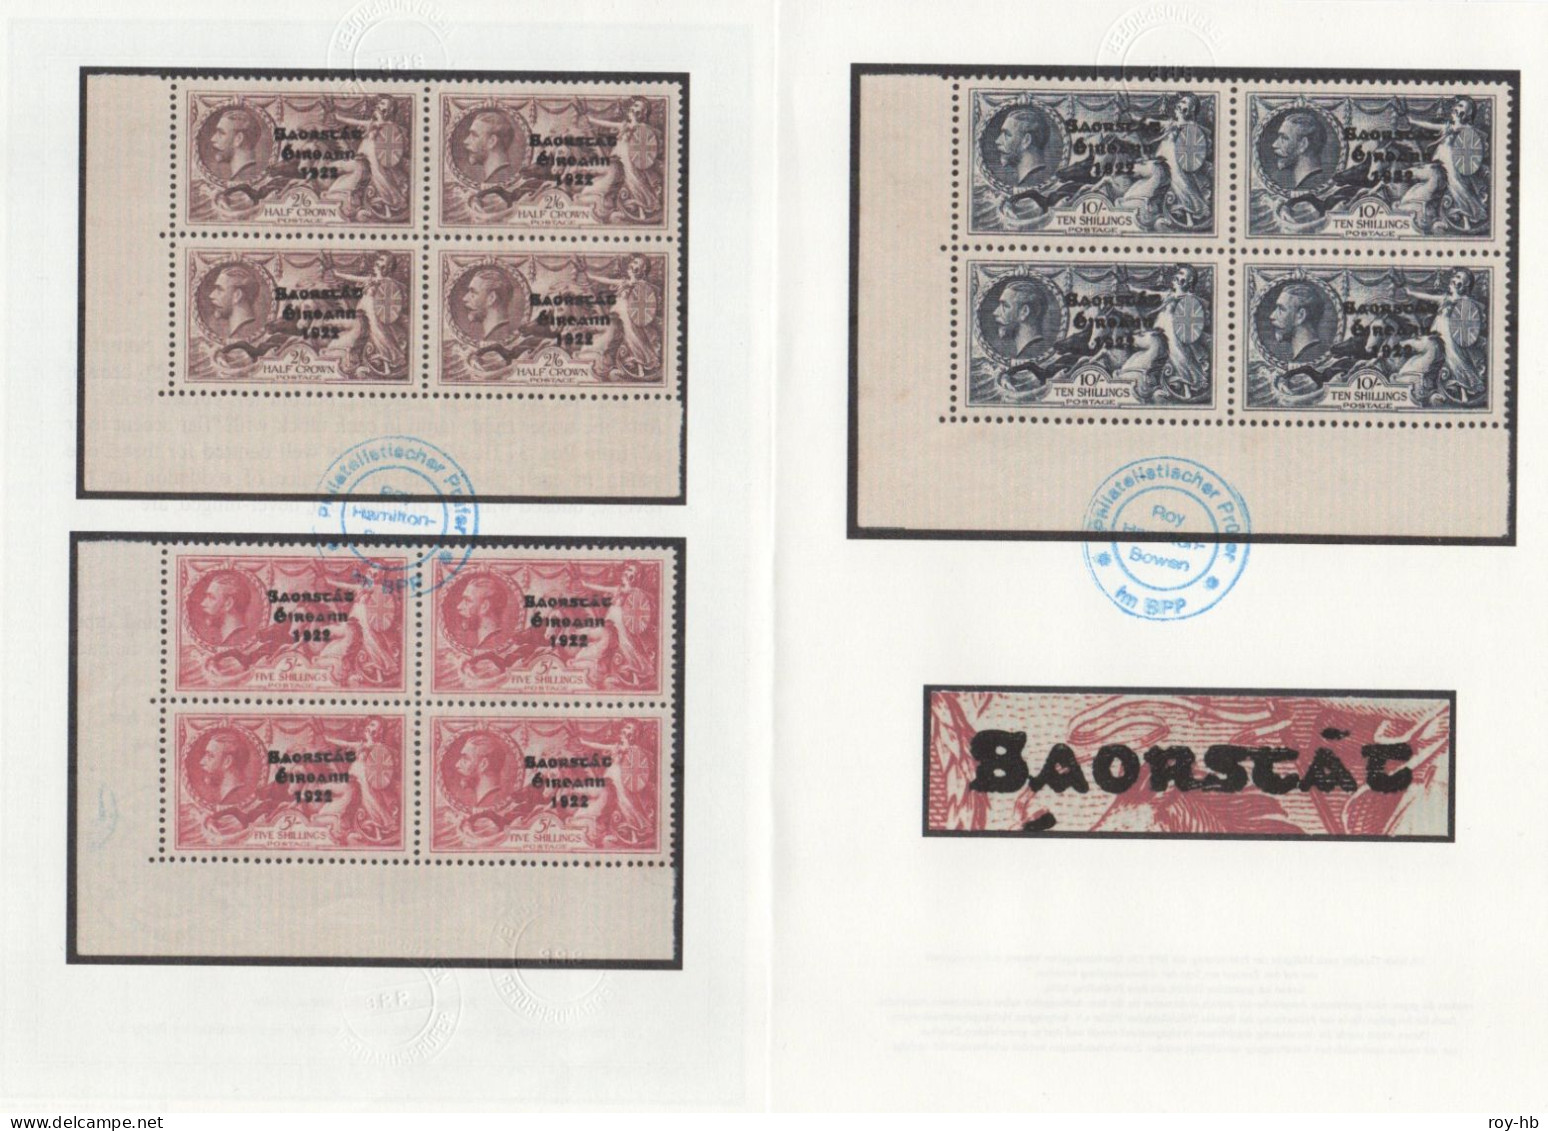 1935 Re-engraved Set SG 99-101, Hib.T75-77, Sc.93-95, Matched BL "flat Accent", Suberb U/m (MNH), With New Certificate. - Unused Stamps